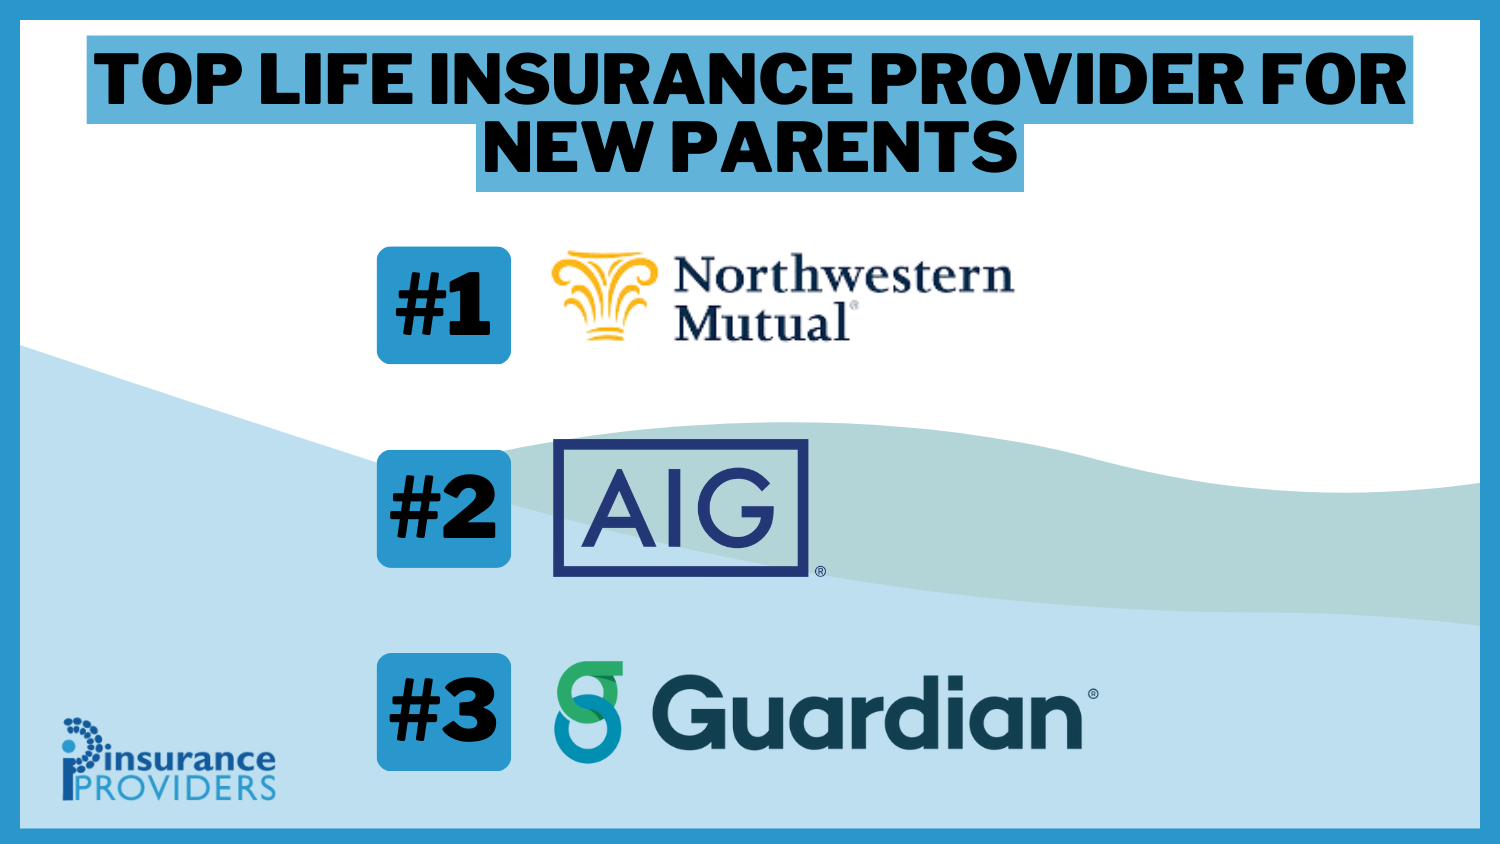 Top Life Insurance Provider for New Parents: Northwestern Mutual, AIG and guardian